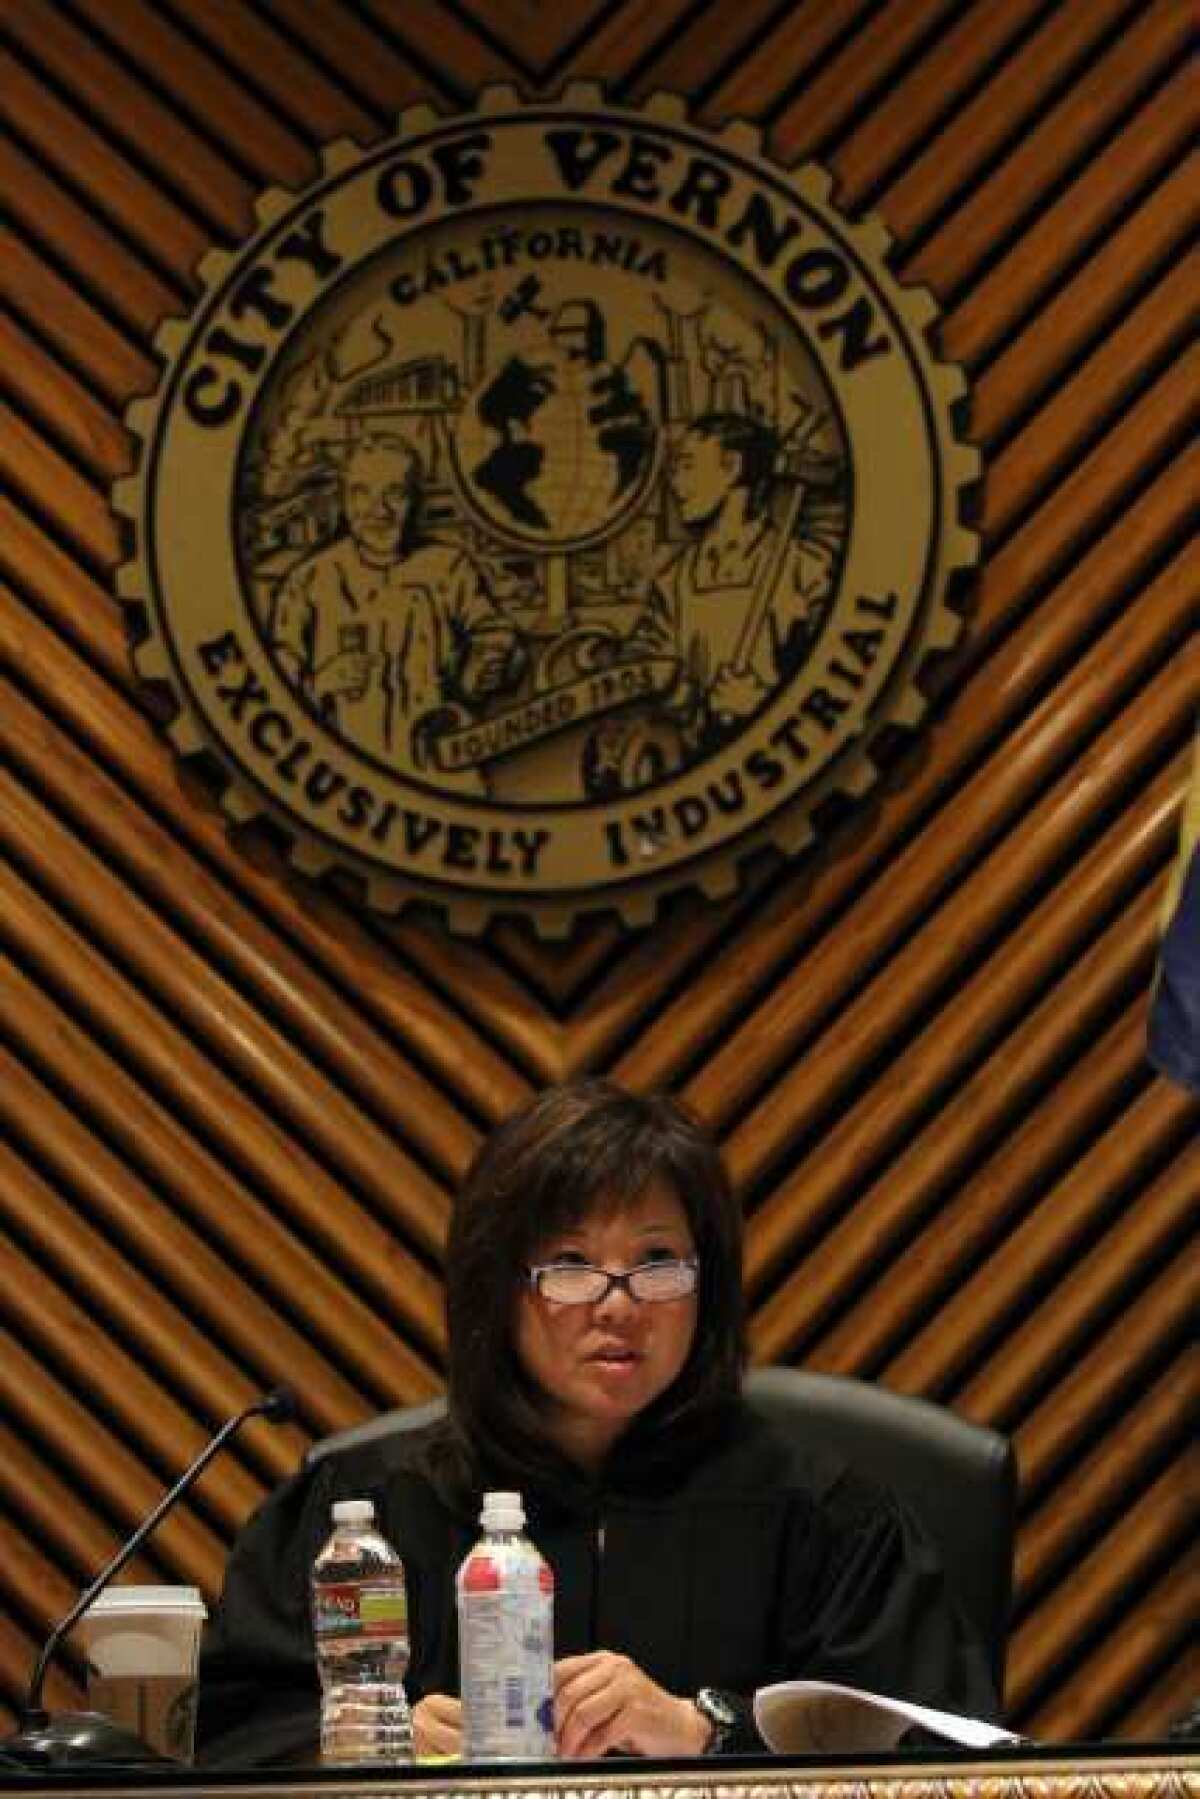 VERNON chose former U.S. attorney and judge Debra Yang to preside over the city's hearing on voter fraud allegations.